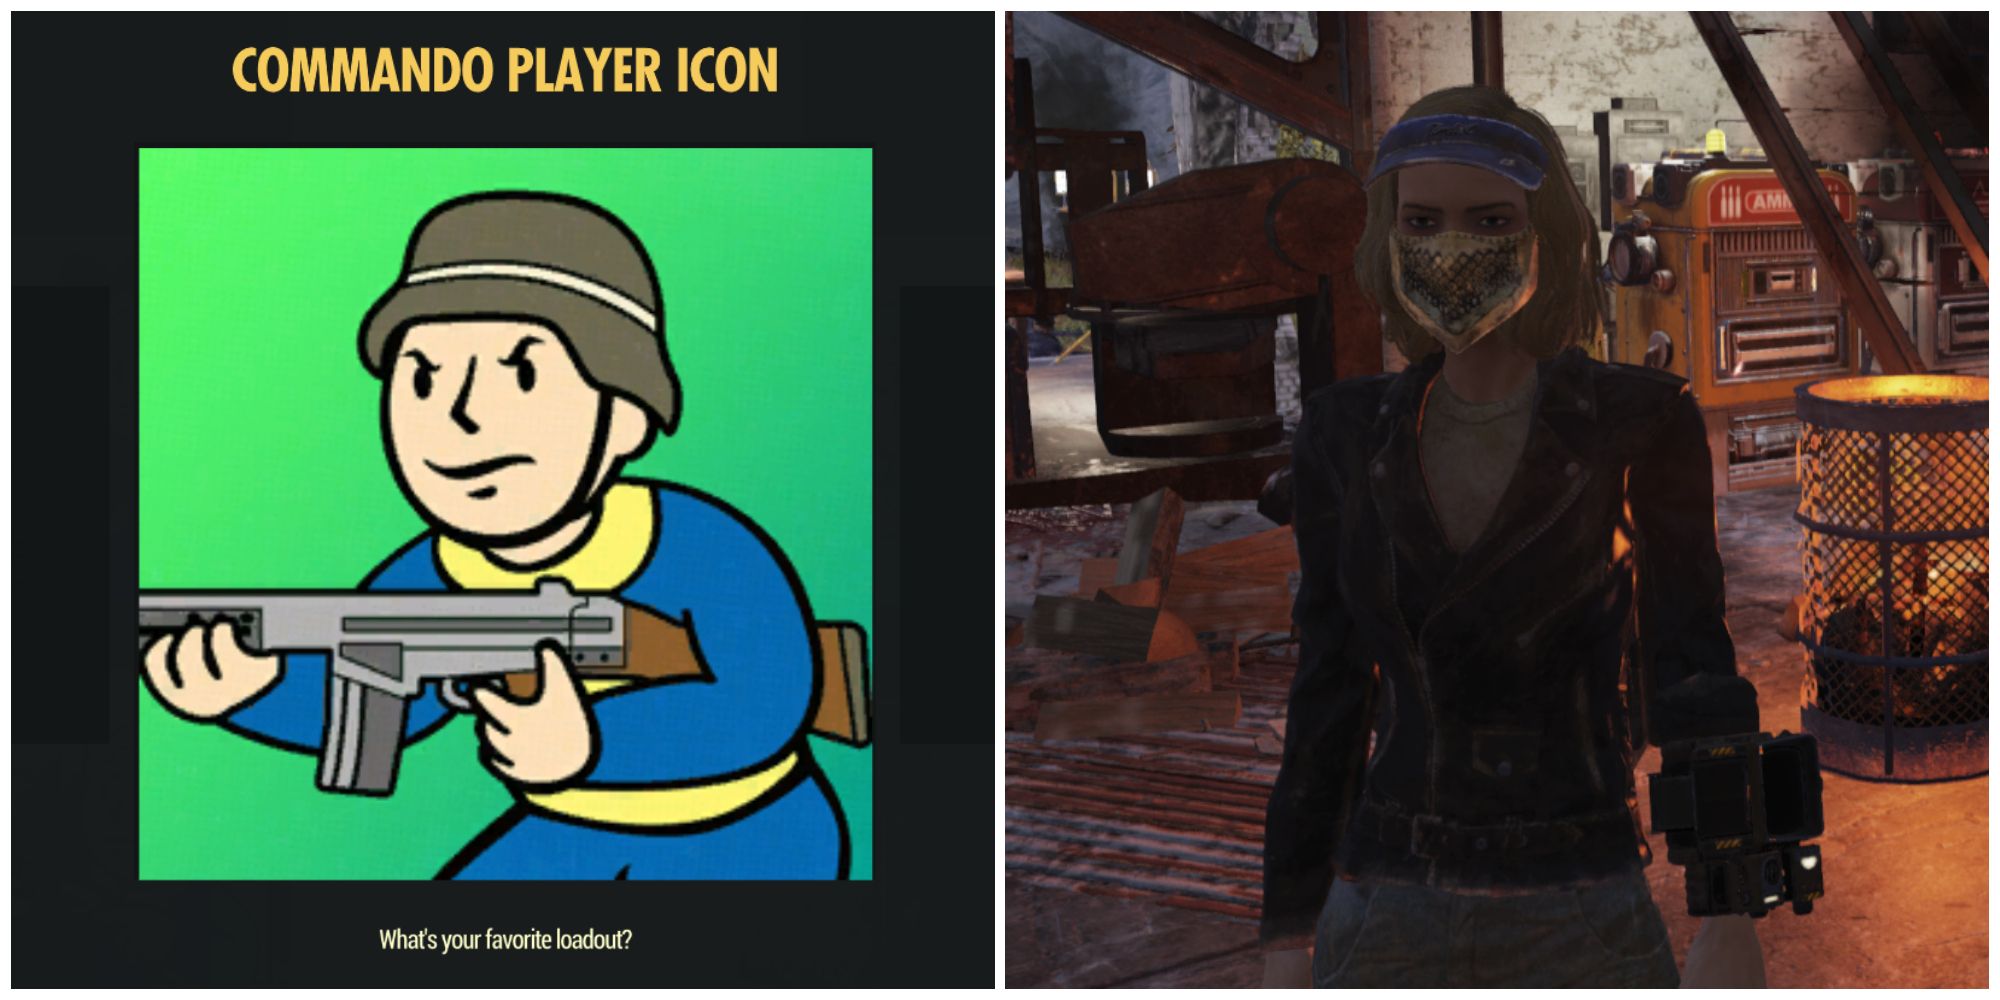 Split image of the commando player icon and a custom character in Fallout 76